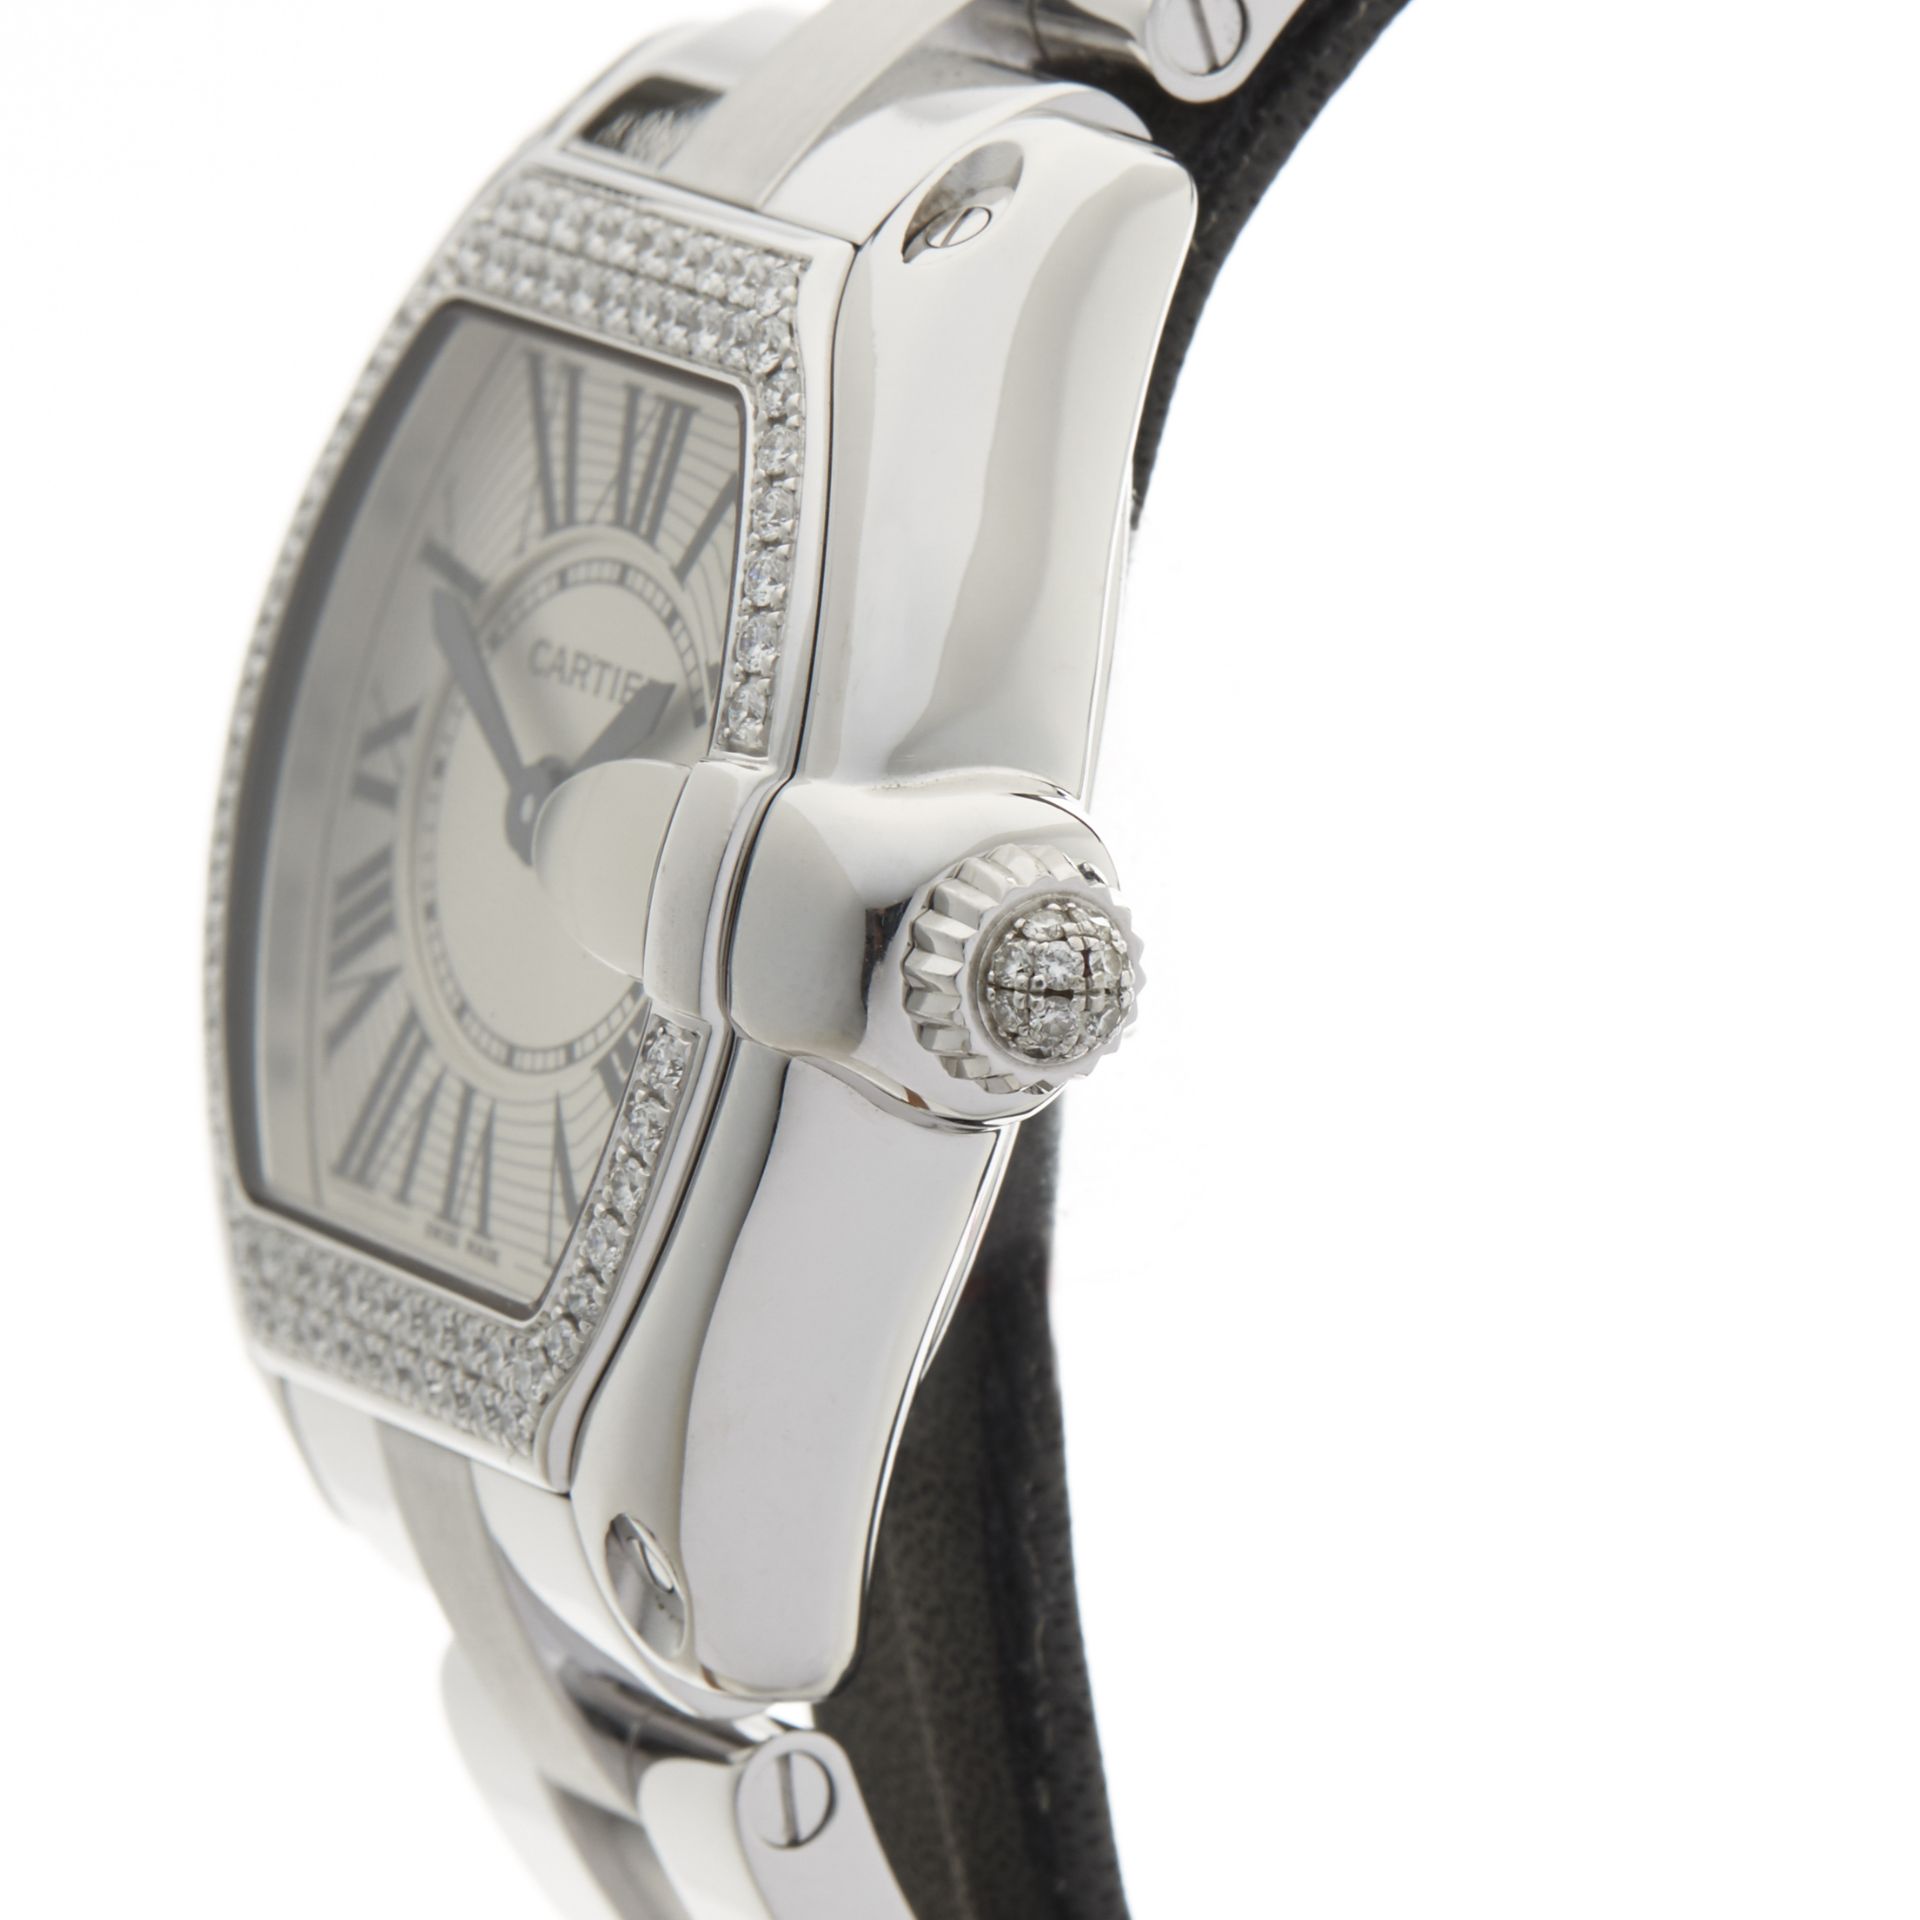 Cartier Roadster 32mm 18k White Gold 2723 - Image 6 of 16